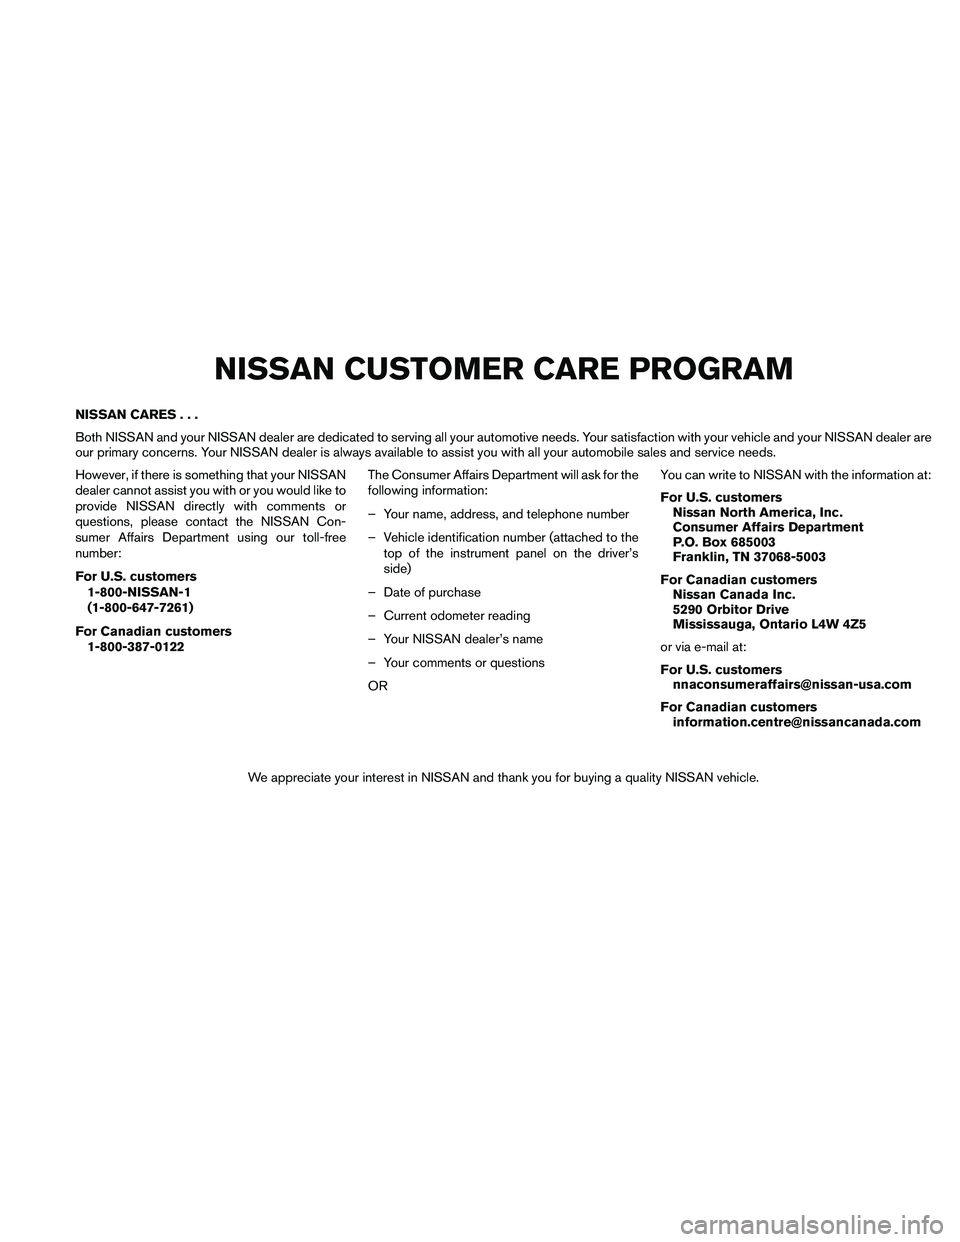 NISSAN XTERRA 2010  Owner´s Manual NISSAN CARES...
Both NISSAN and your NISSAN dealer are dedicated to serving all your automotive needs. Your satisfaction with your vehicle and your NISSAN dealer are
our primary concerns. Your NISSAN 